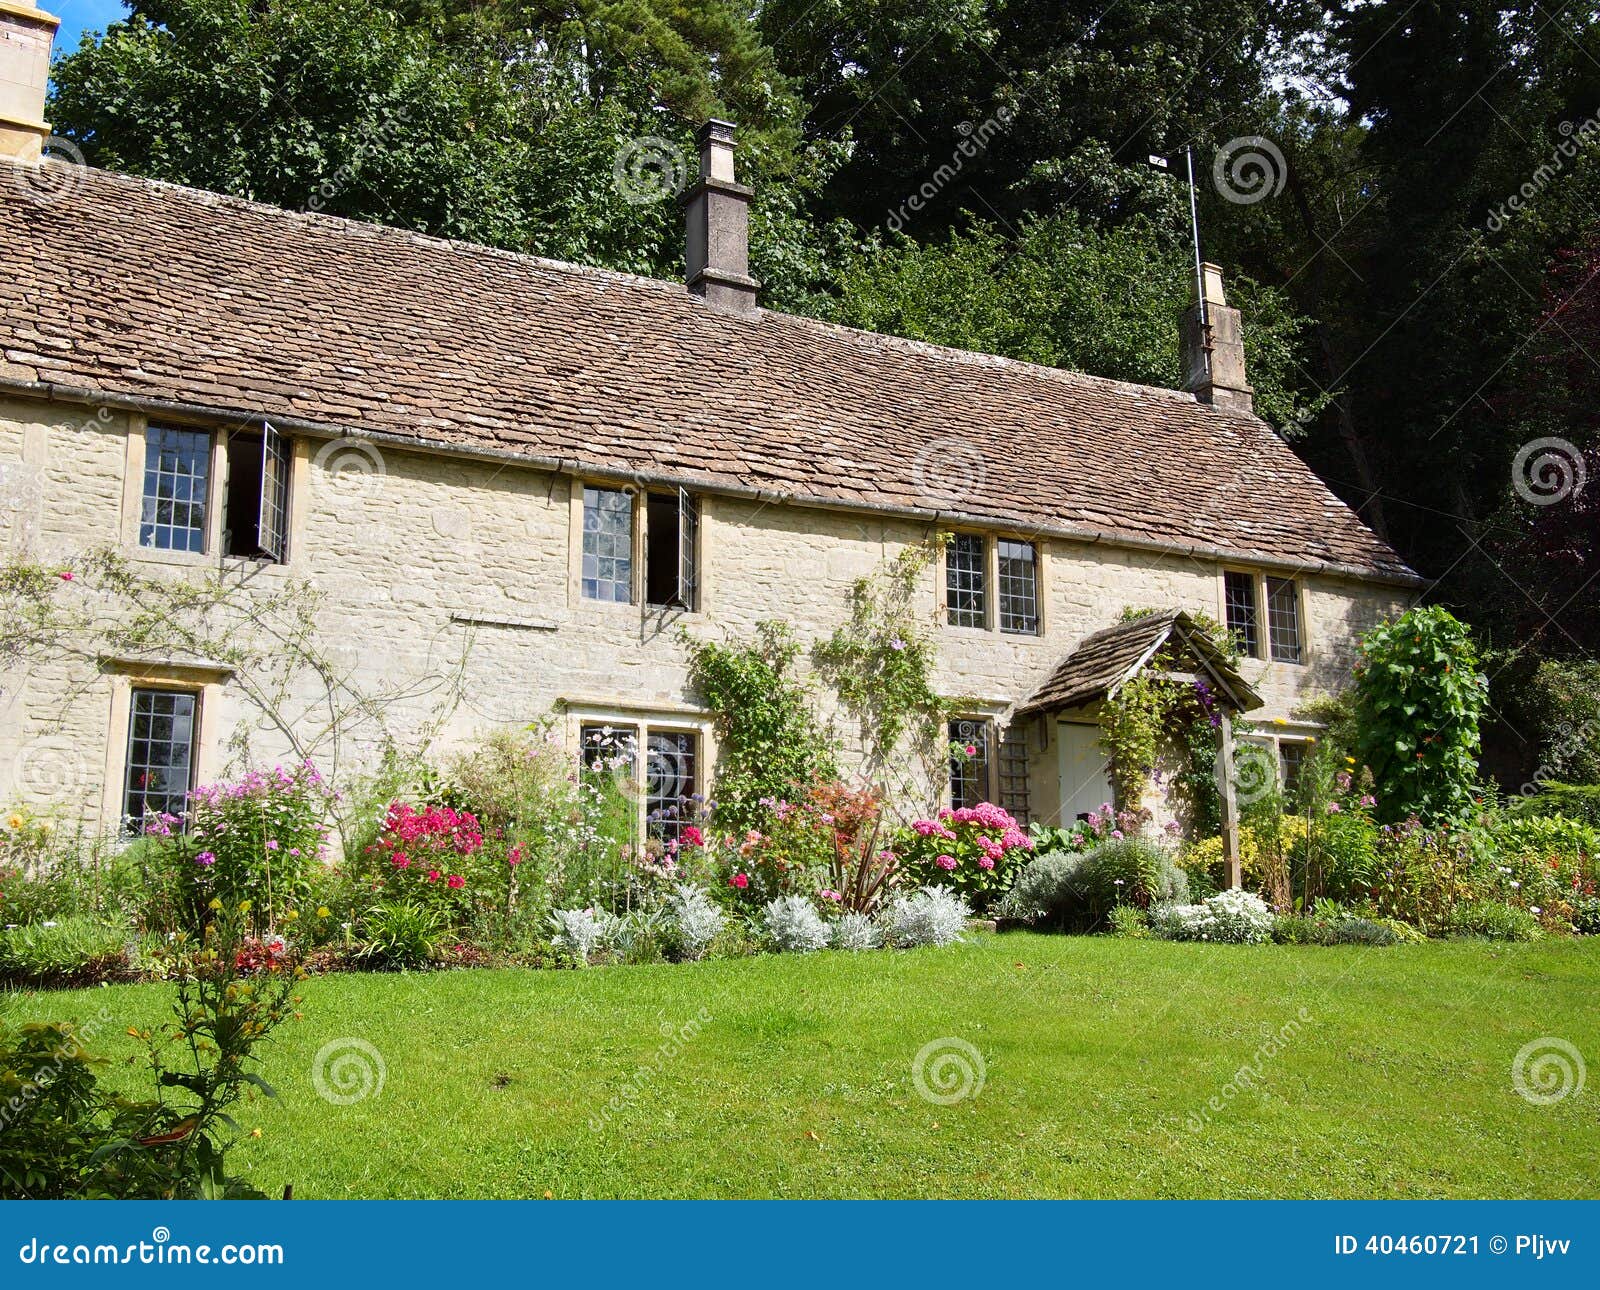 English Cottage With Flower Garden Stock Image Image Of Slate